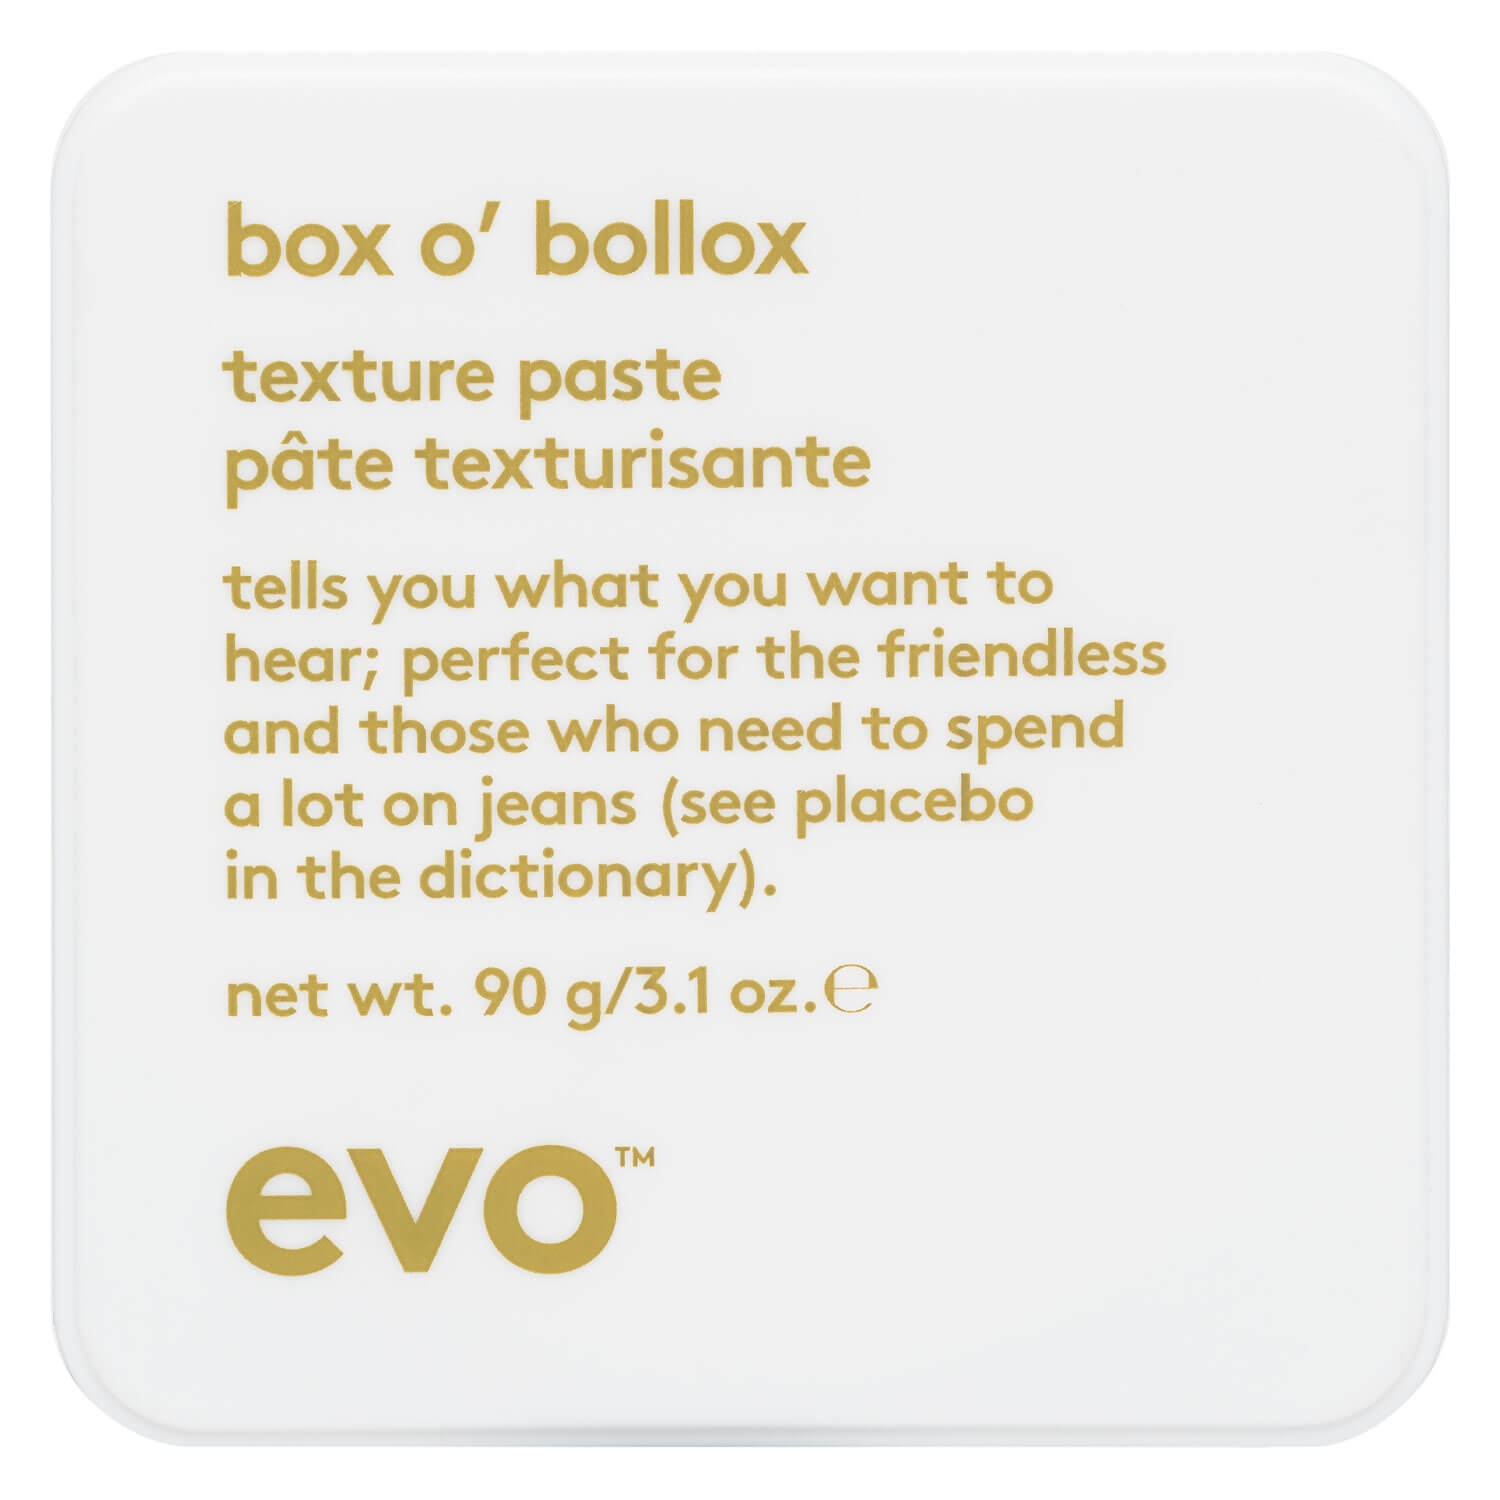 Product image from evo style - box o’ bollox texture paste